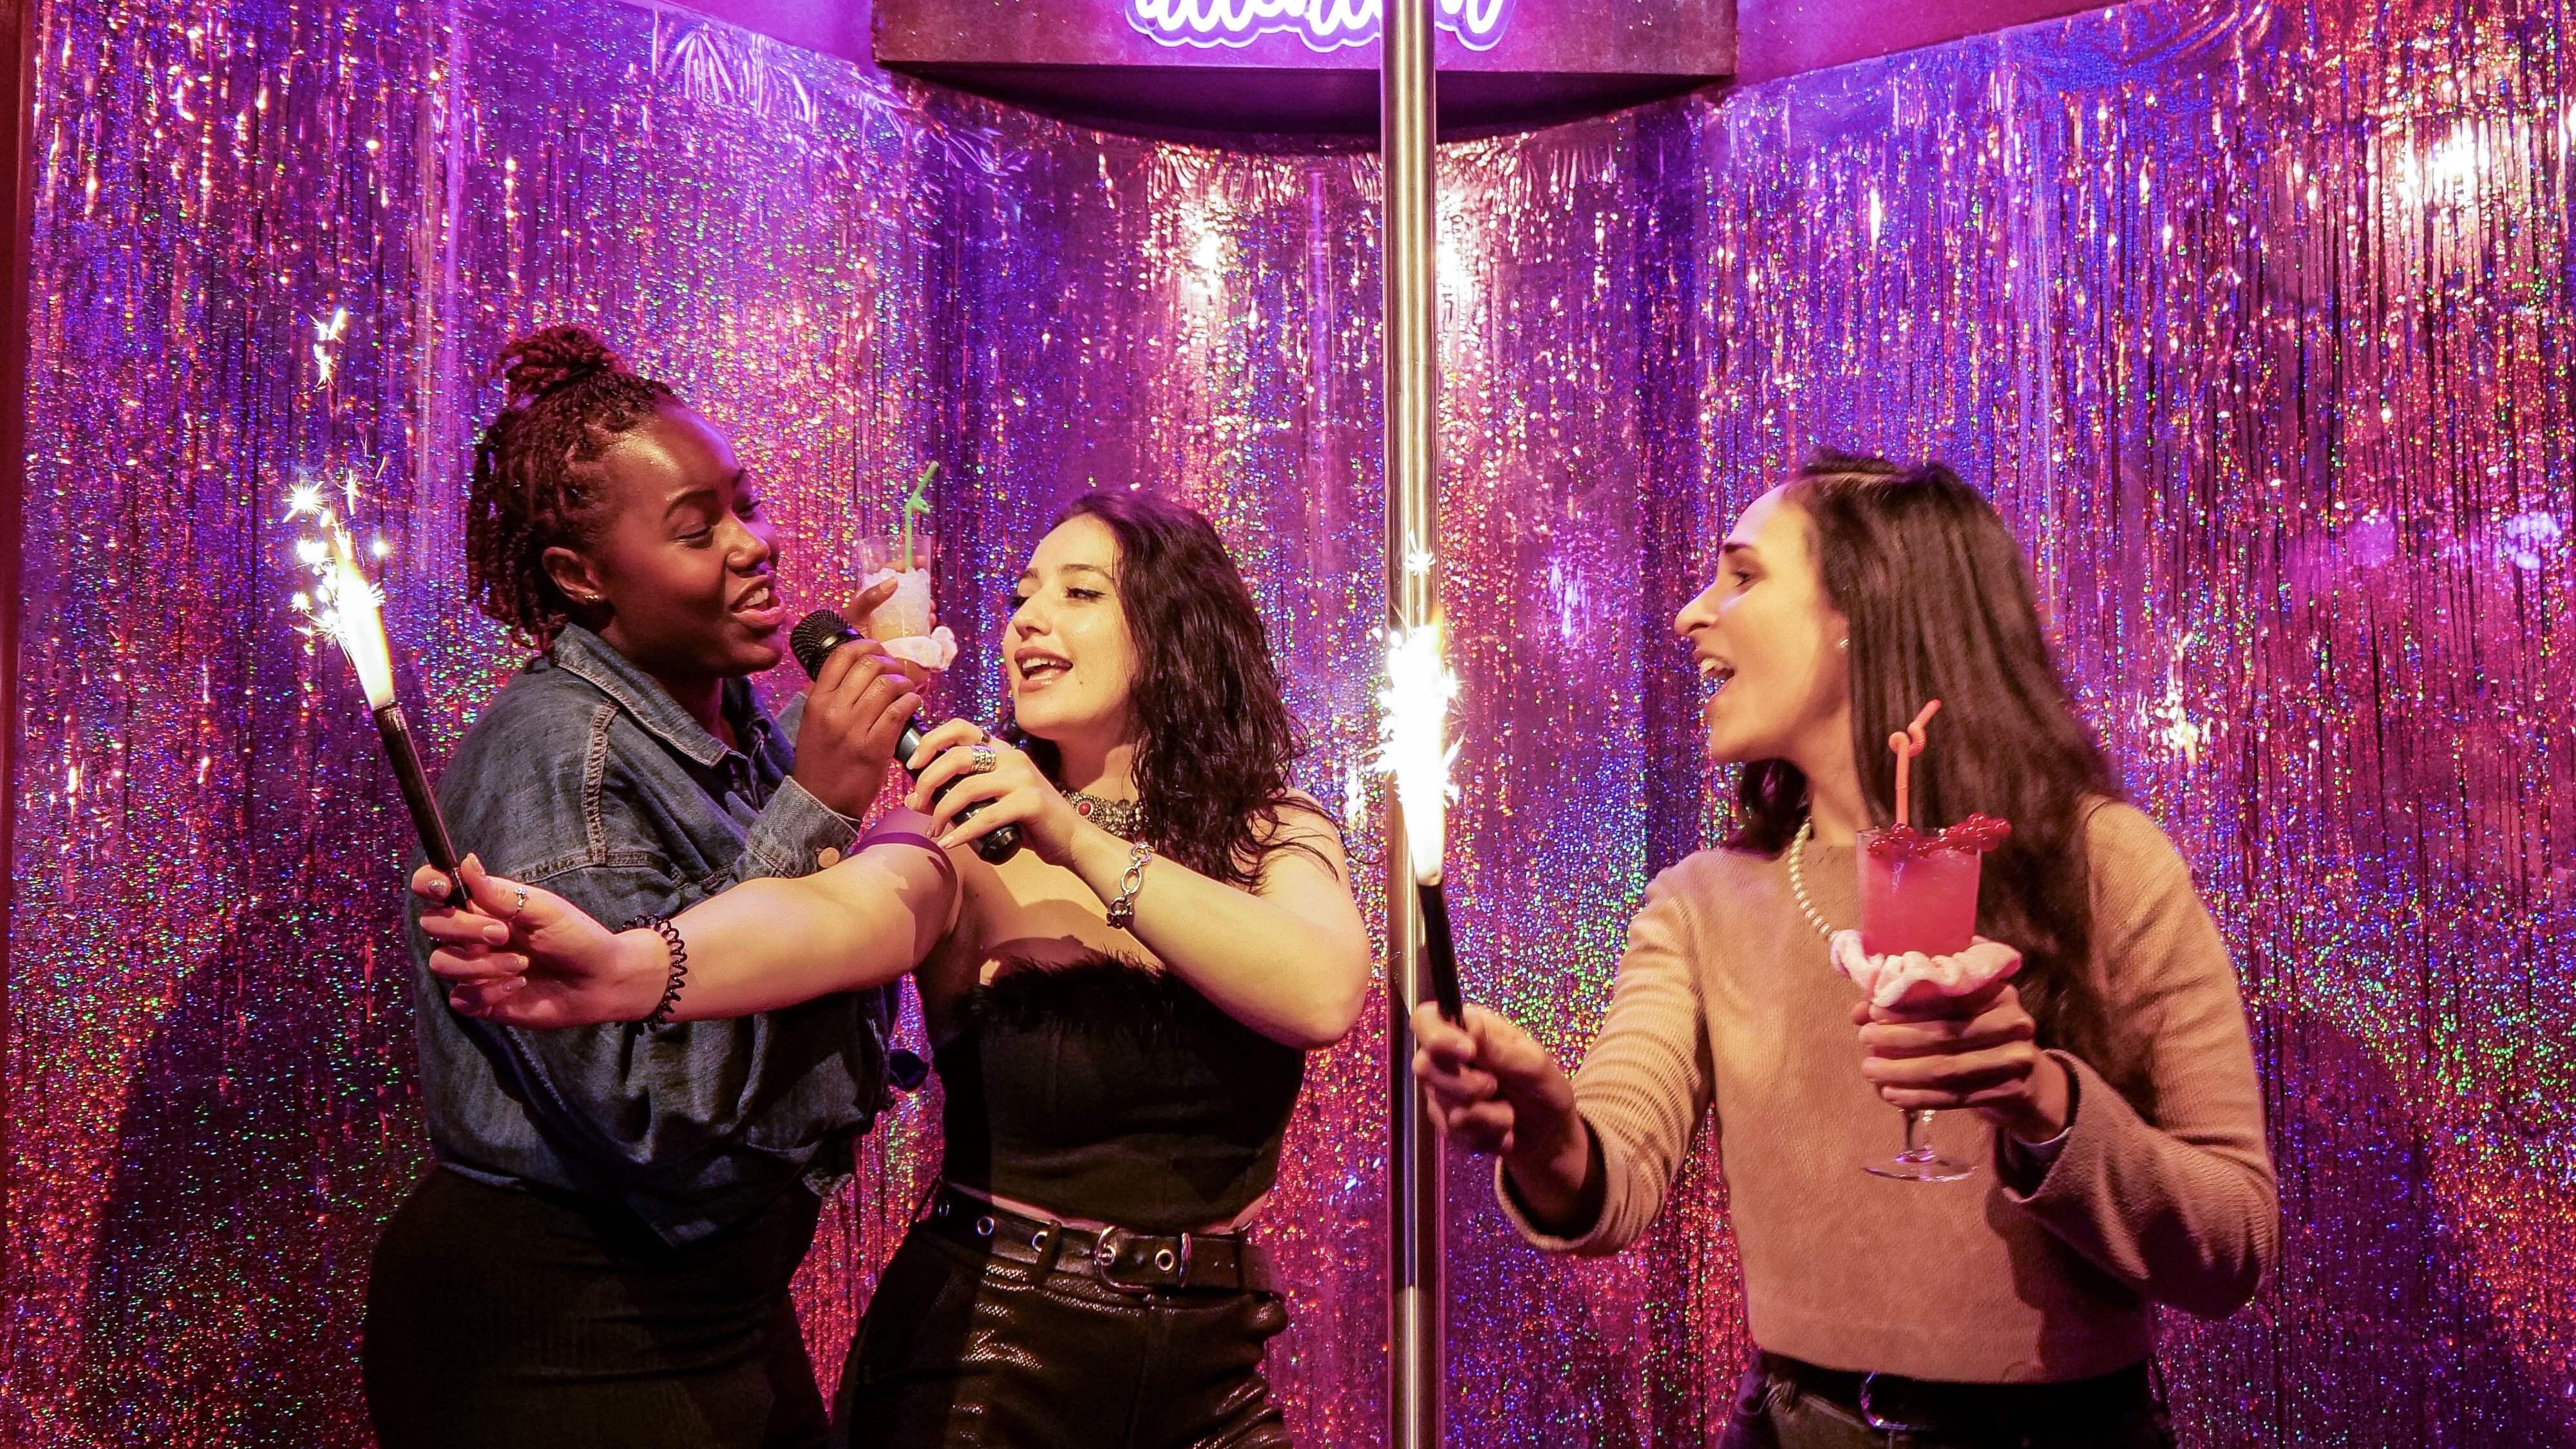 three women singing in a. karaoke booth, holding sparklers and cocktails